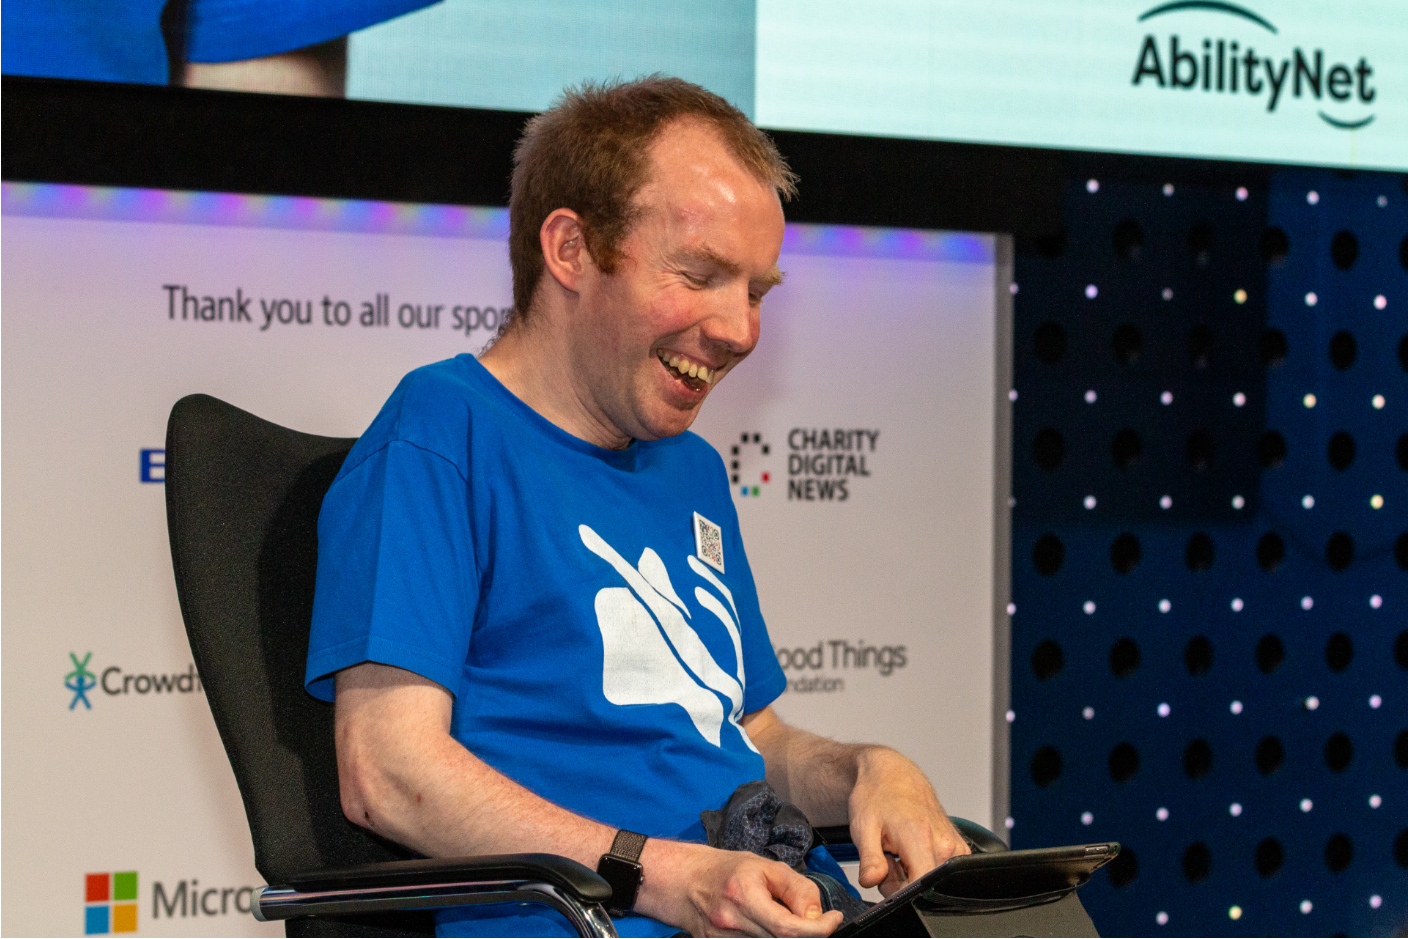 Colour photo of Lost Voice Guy at Tech4Good Awards 2019